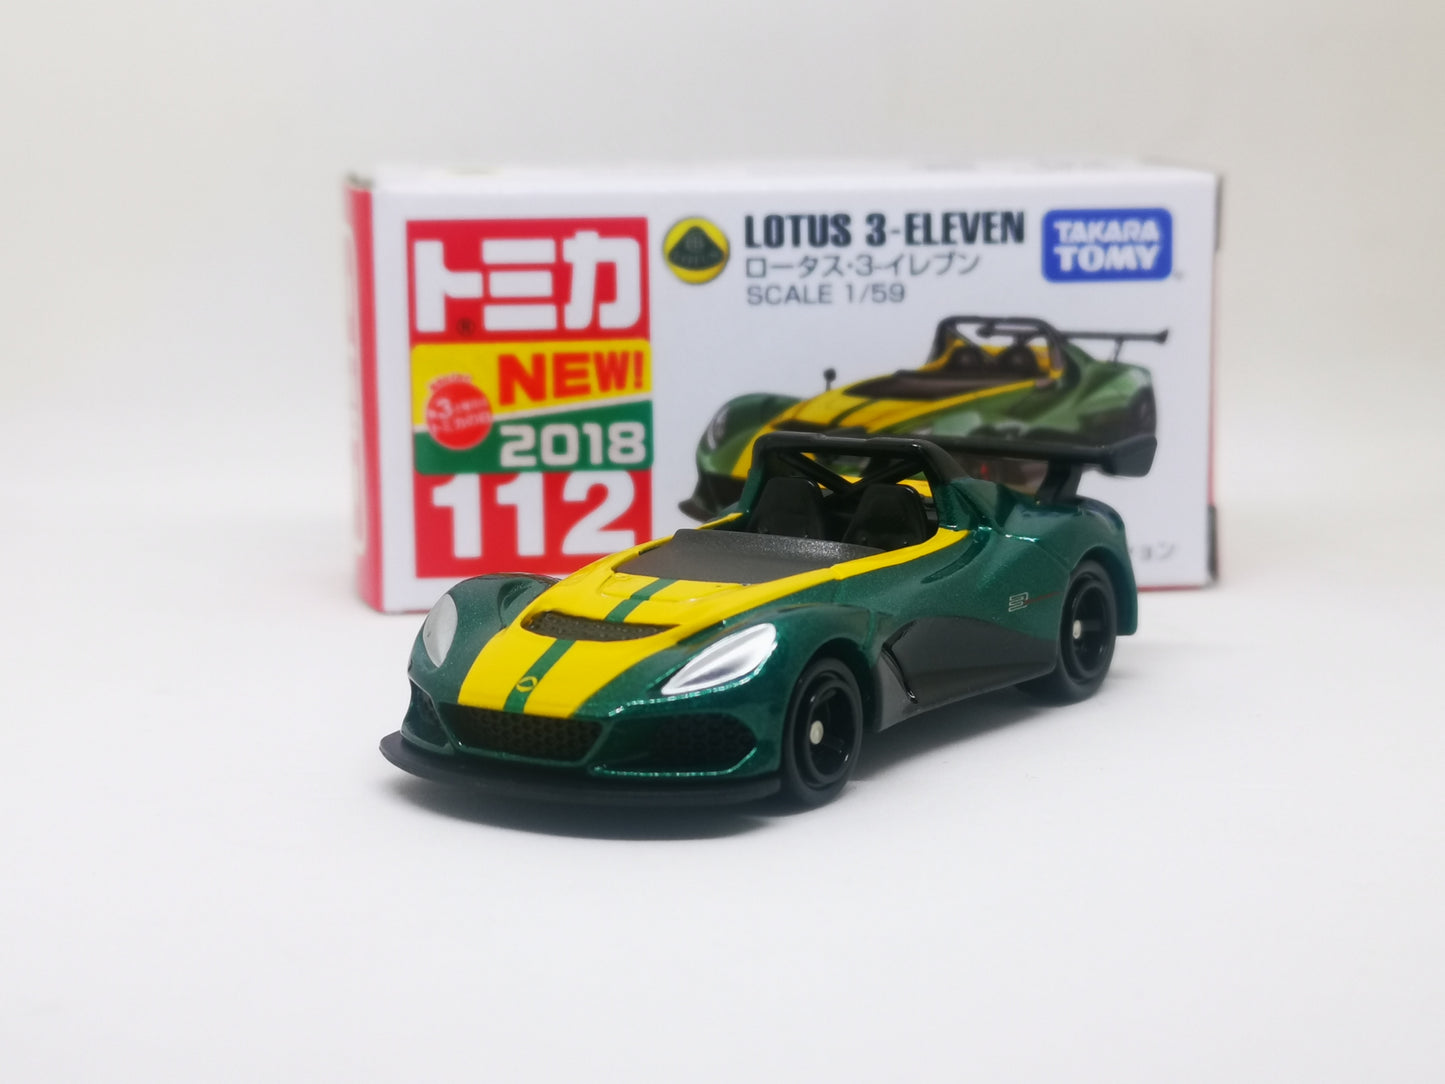 Tomica #112 Lotus 3-Eleven 1:59 Scale Set of Two